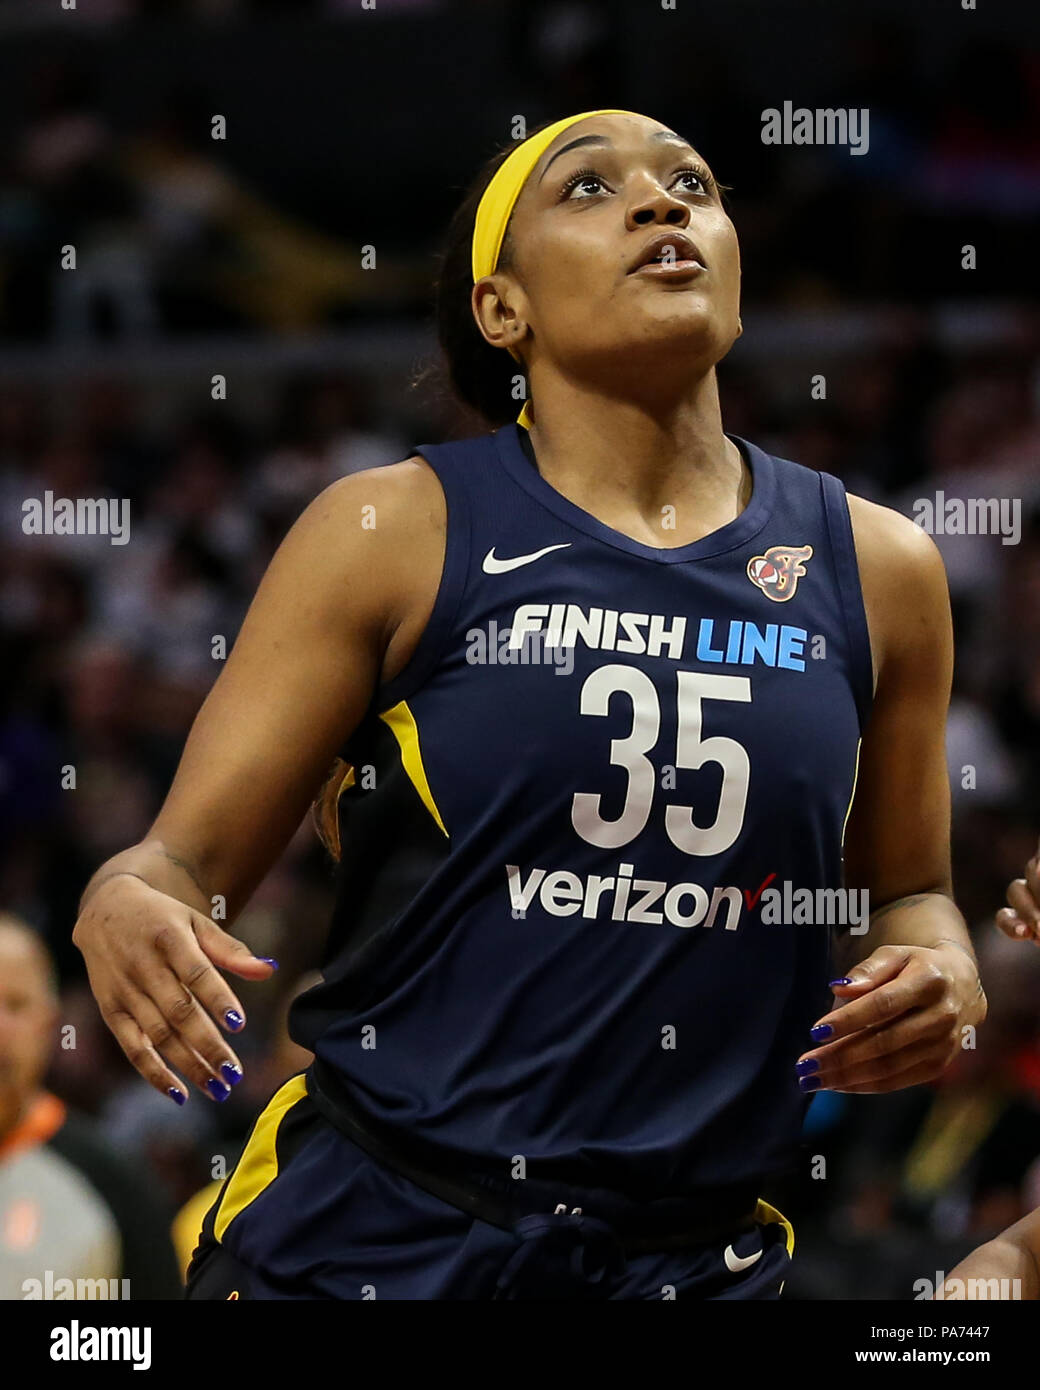 Indiana Fever guard Victoria Vivians #35 during the Indiana Fever vs Los Angeles Sparks game at Staples Center in Los Angeles, Ca on July 1, 2018. (Photo by Jevone Moore) Stock Photo